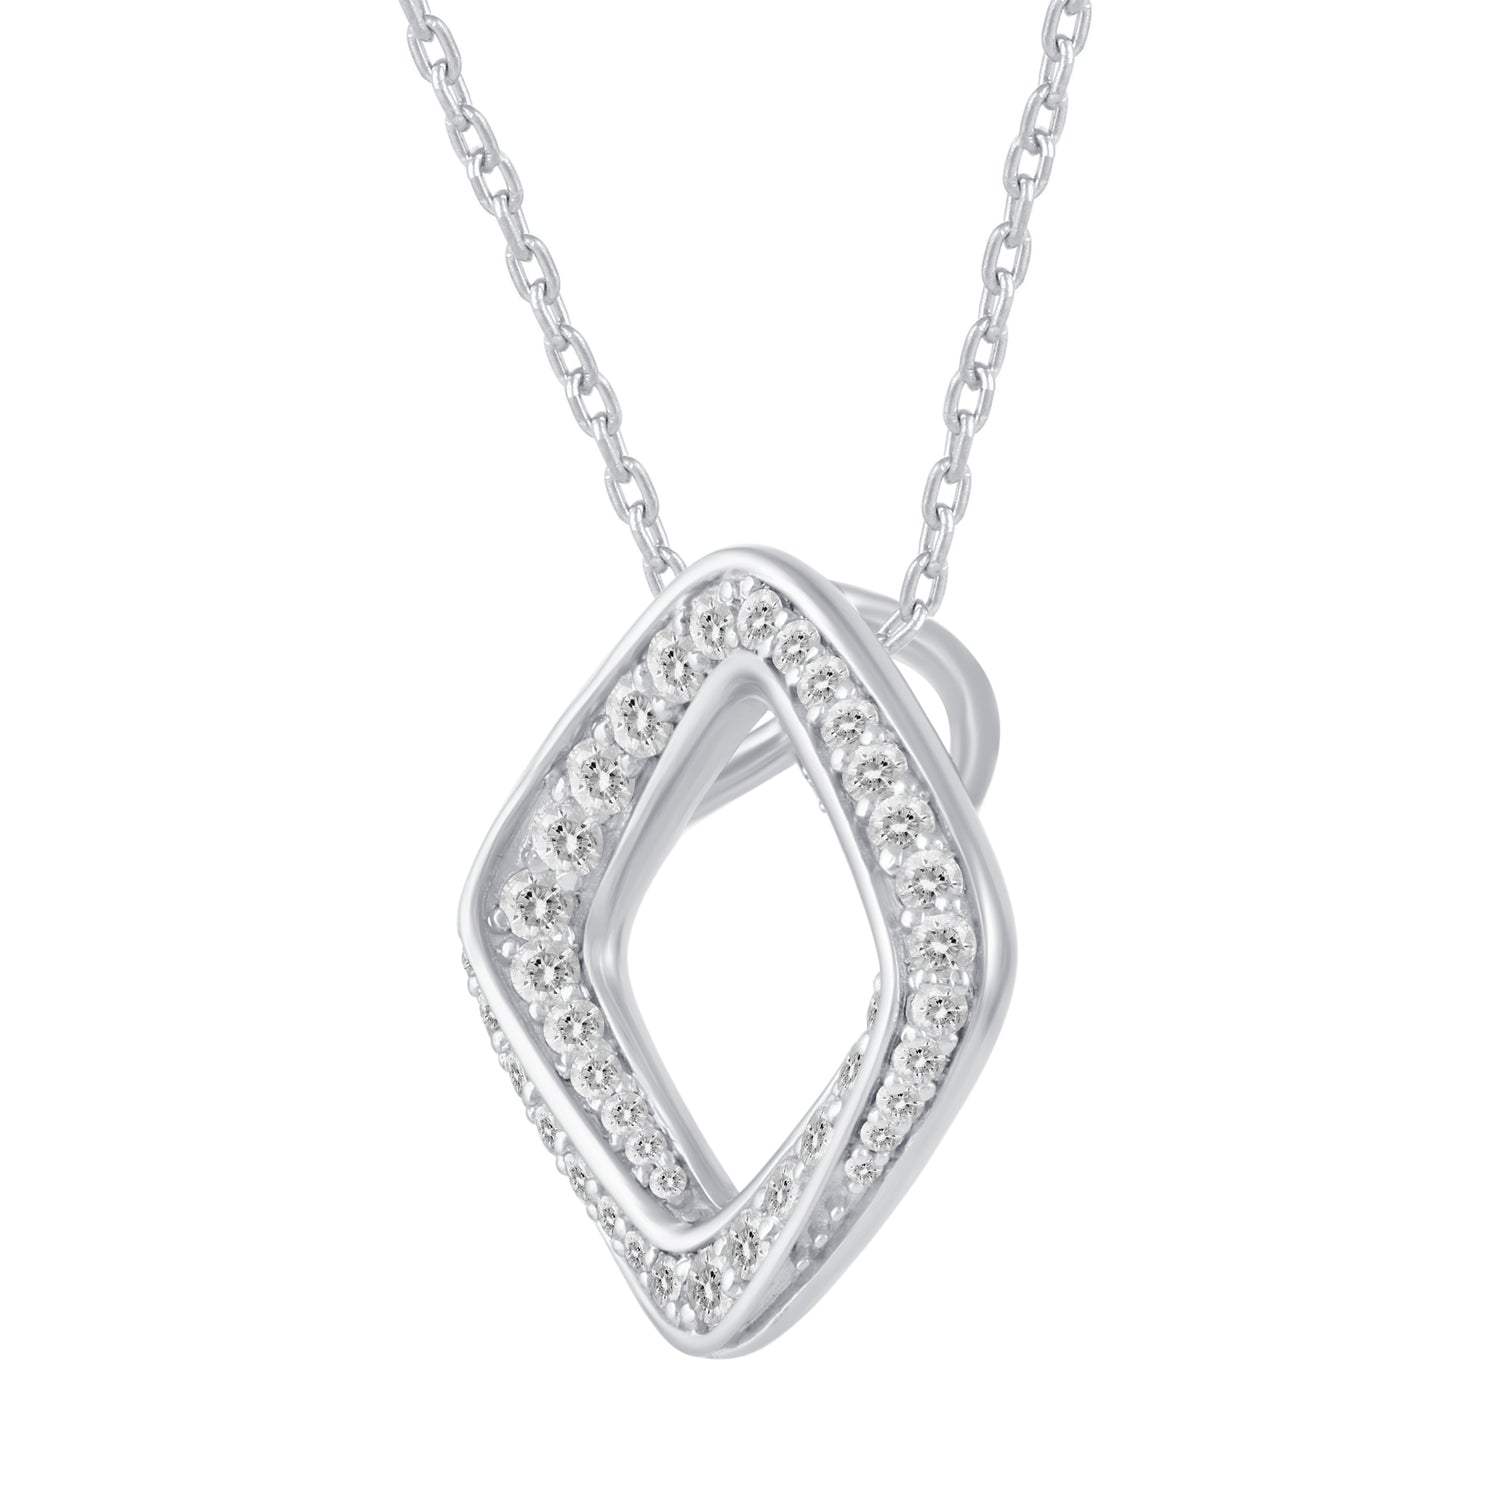 1/2 Cttw Diamond Square Pave Twisted Infinity Pendant Necklace set in 925 Sterling Silver